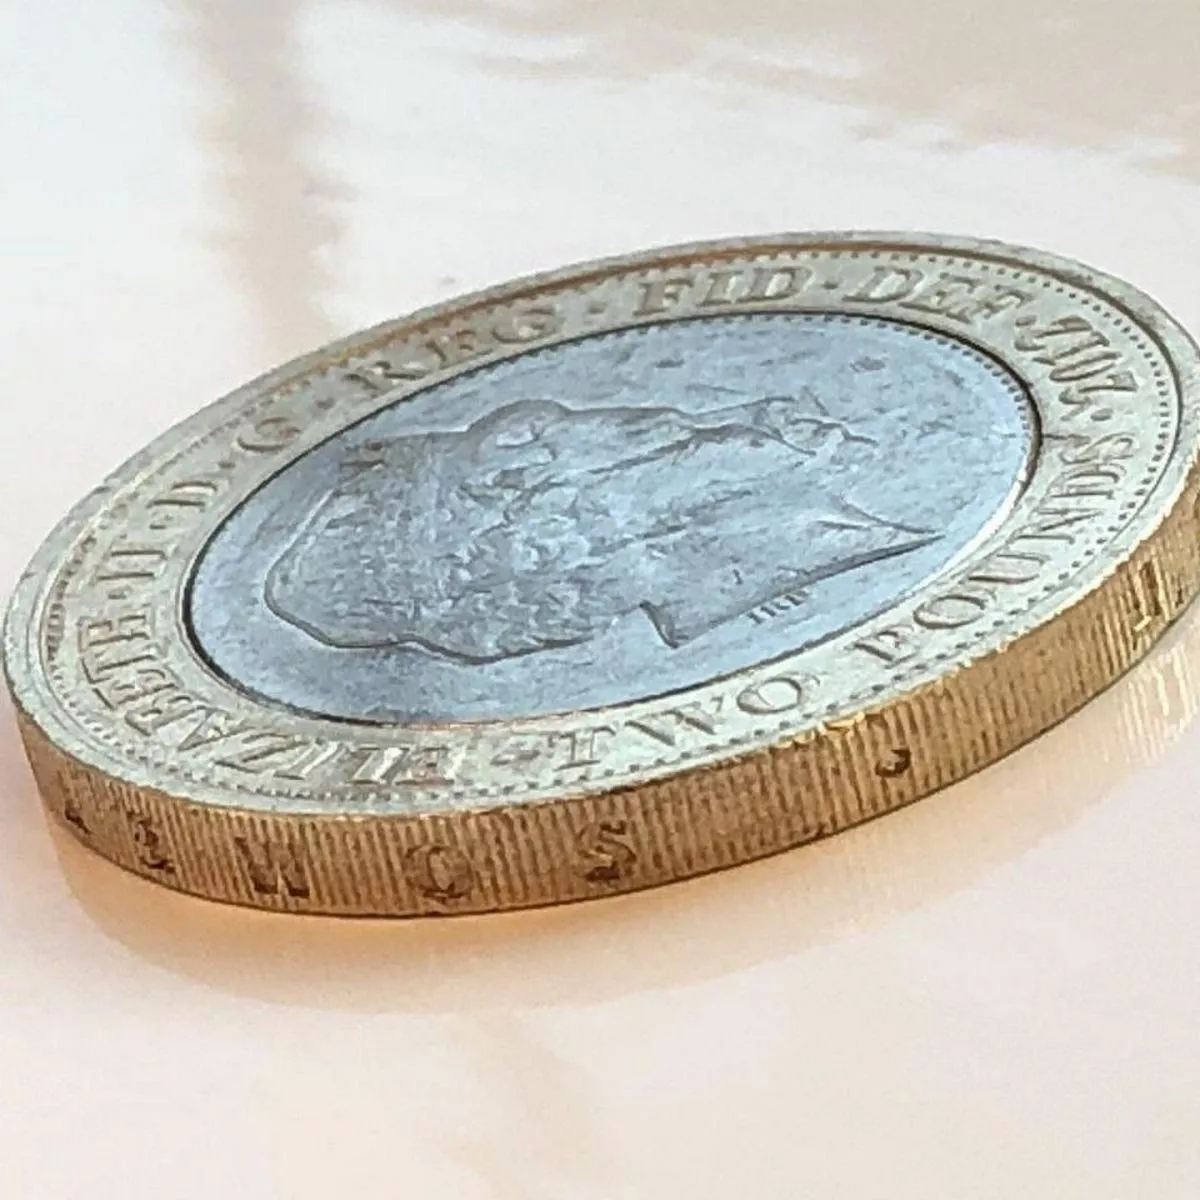 rare charles dickens 2 coin